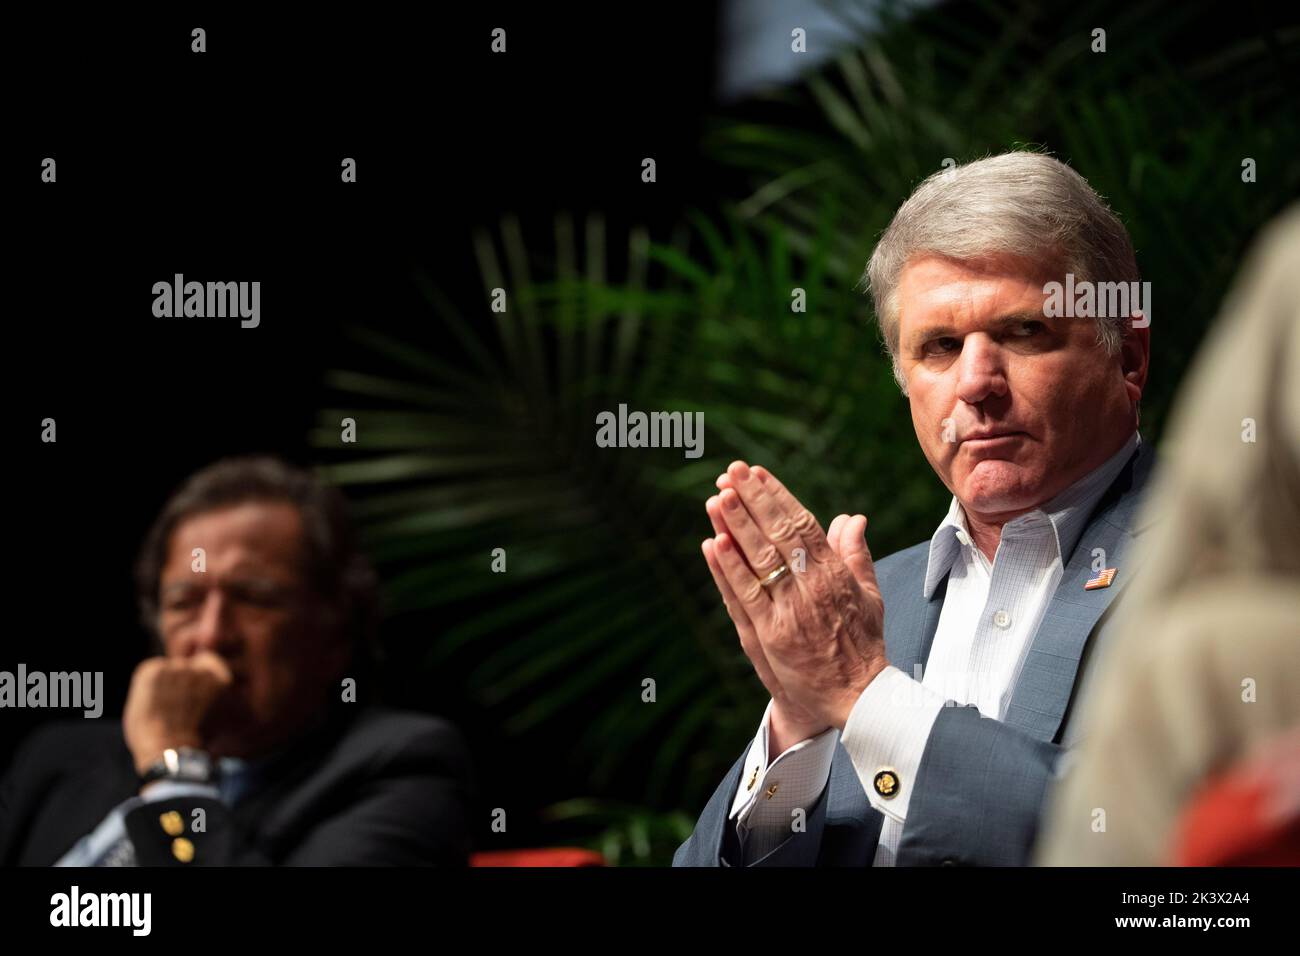 Texas Republican congressman MICHAEL MCCAUL speaks during an interview session at the annual Texas Tribune Festival in downtown Austin on September 24, 2022. McCaul, who represents Texas' 10th District, is on the Foreign Affairs Committee. Stock Photo